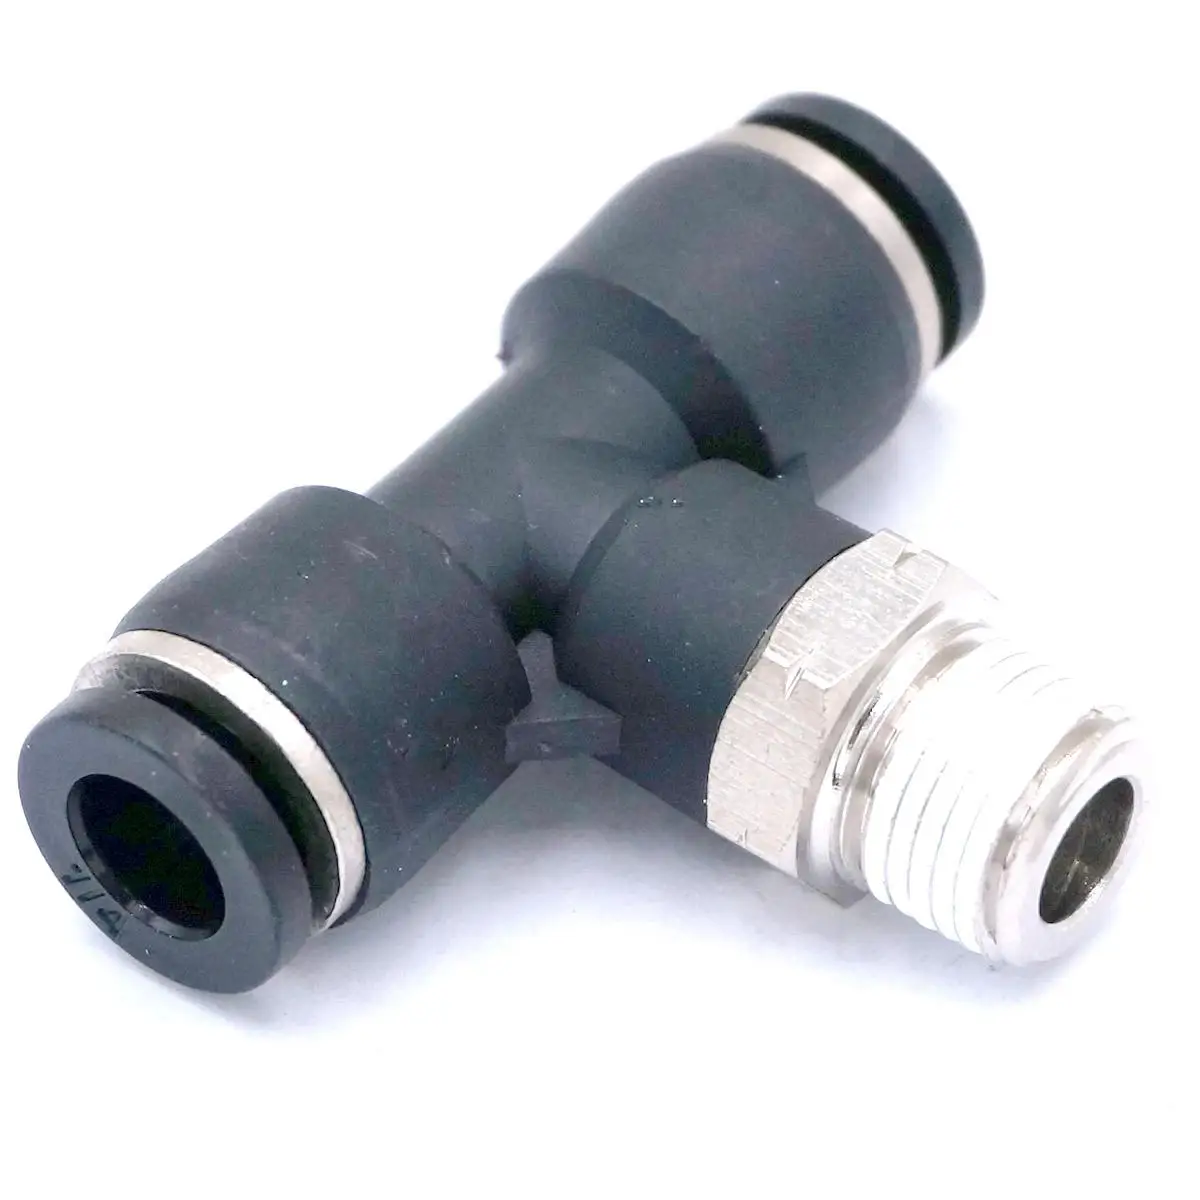 Pneumatic 4 mm Tube x 1/8" BSP Thread Male Tee Branch Connector Push In Fitting 